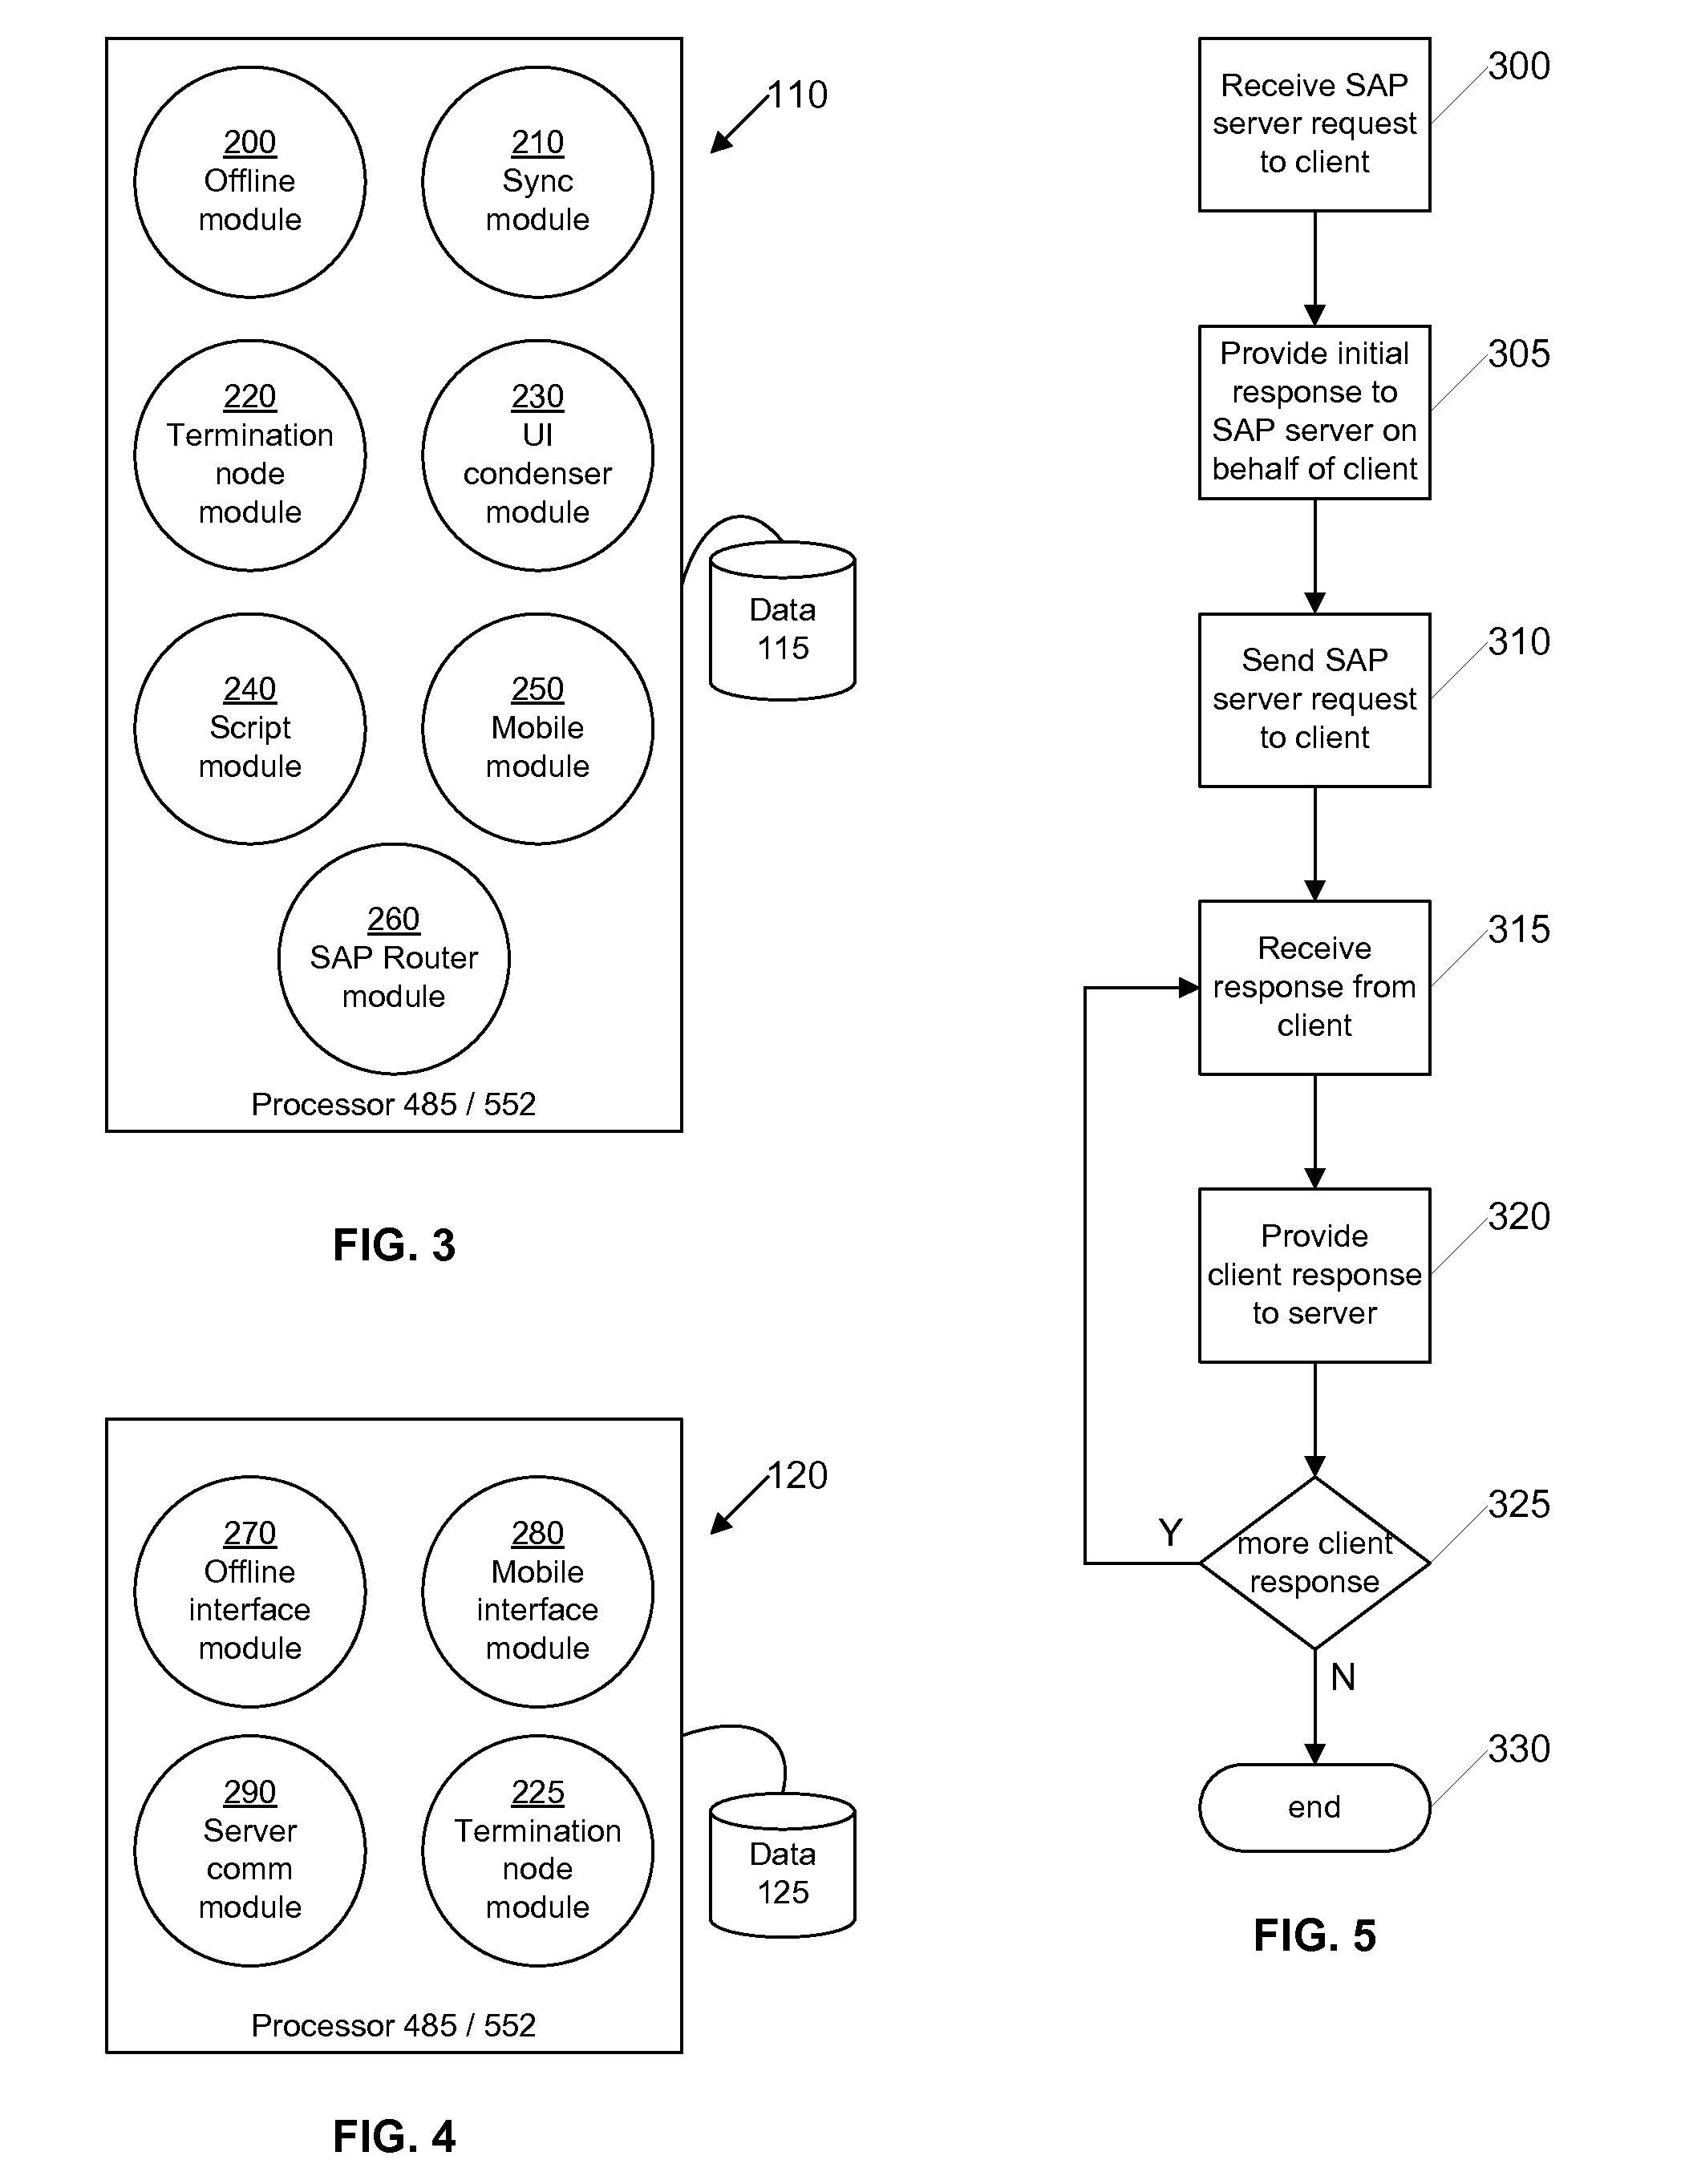 System and Method for Improved SAP Communications